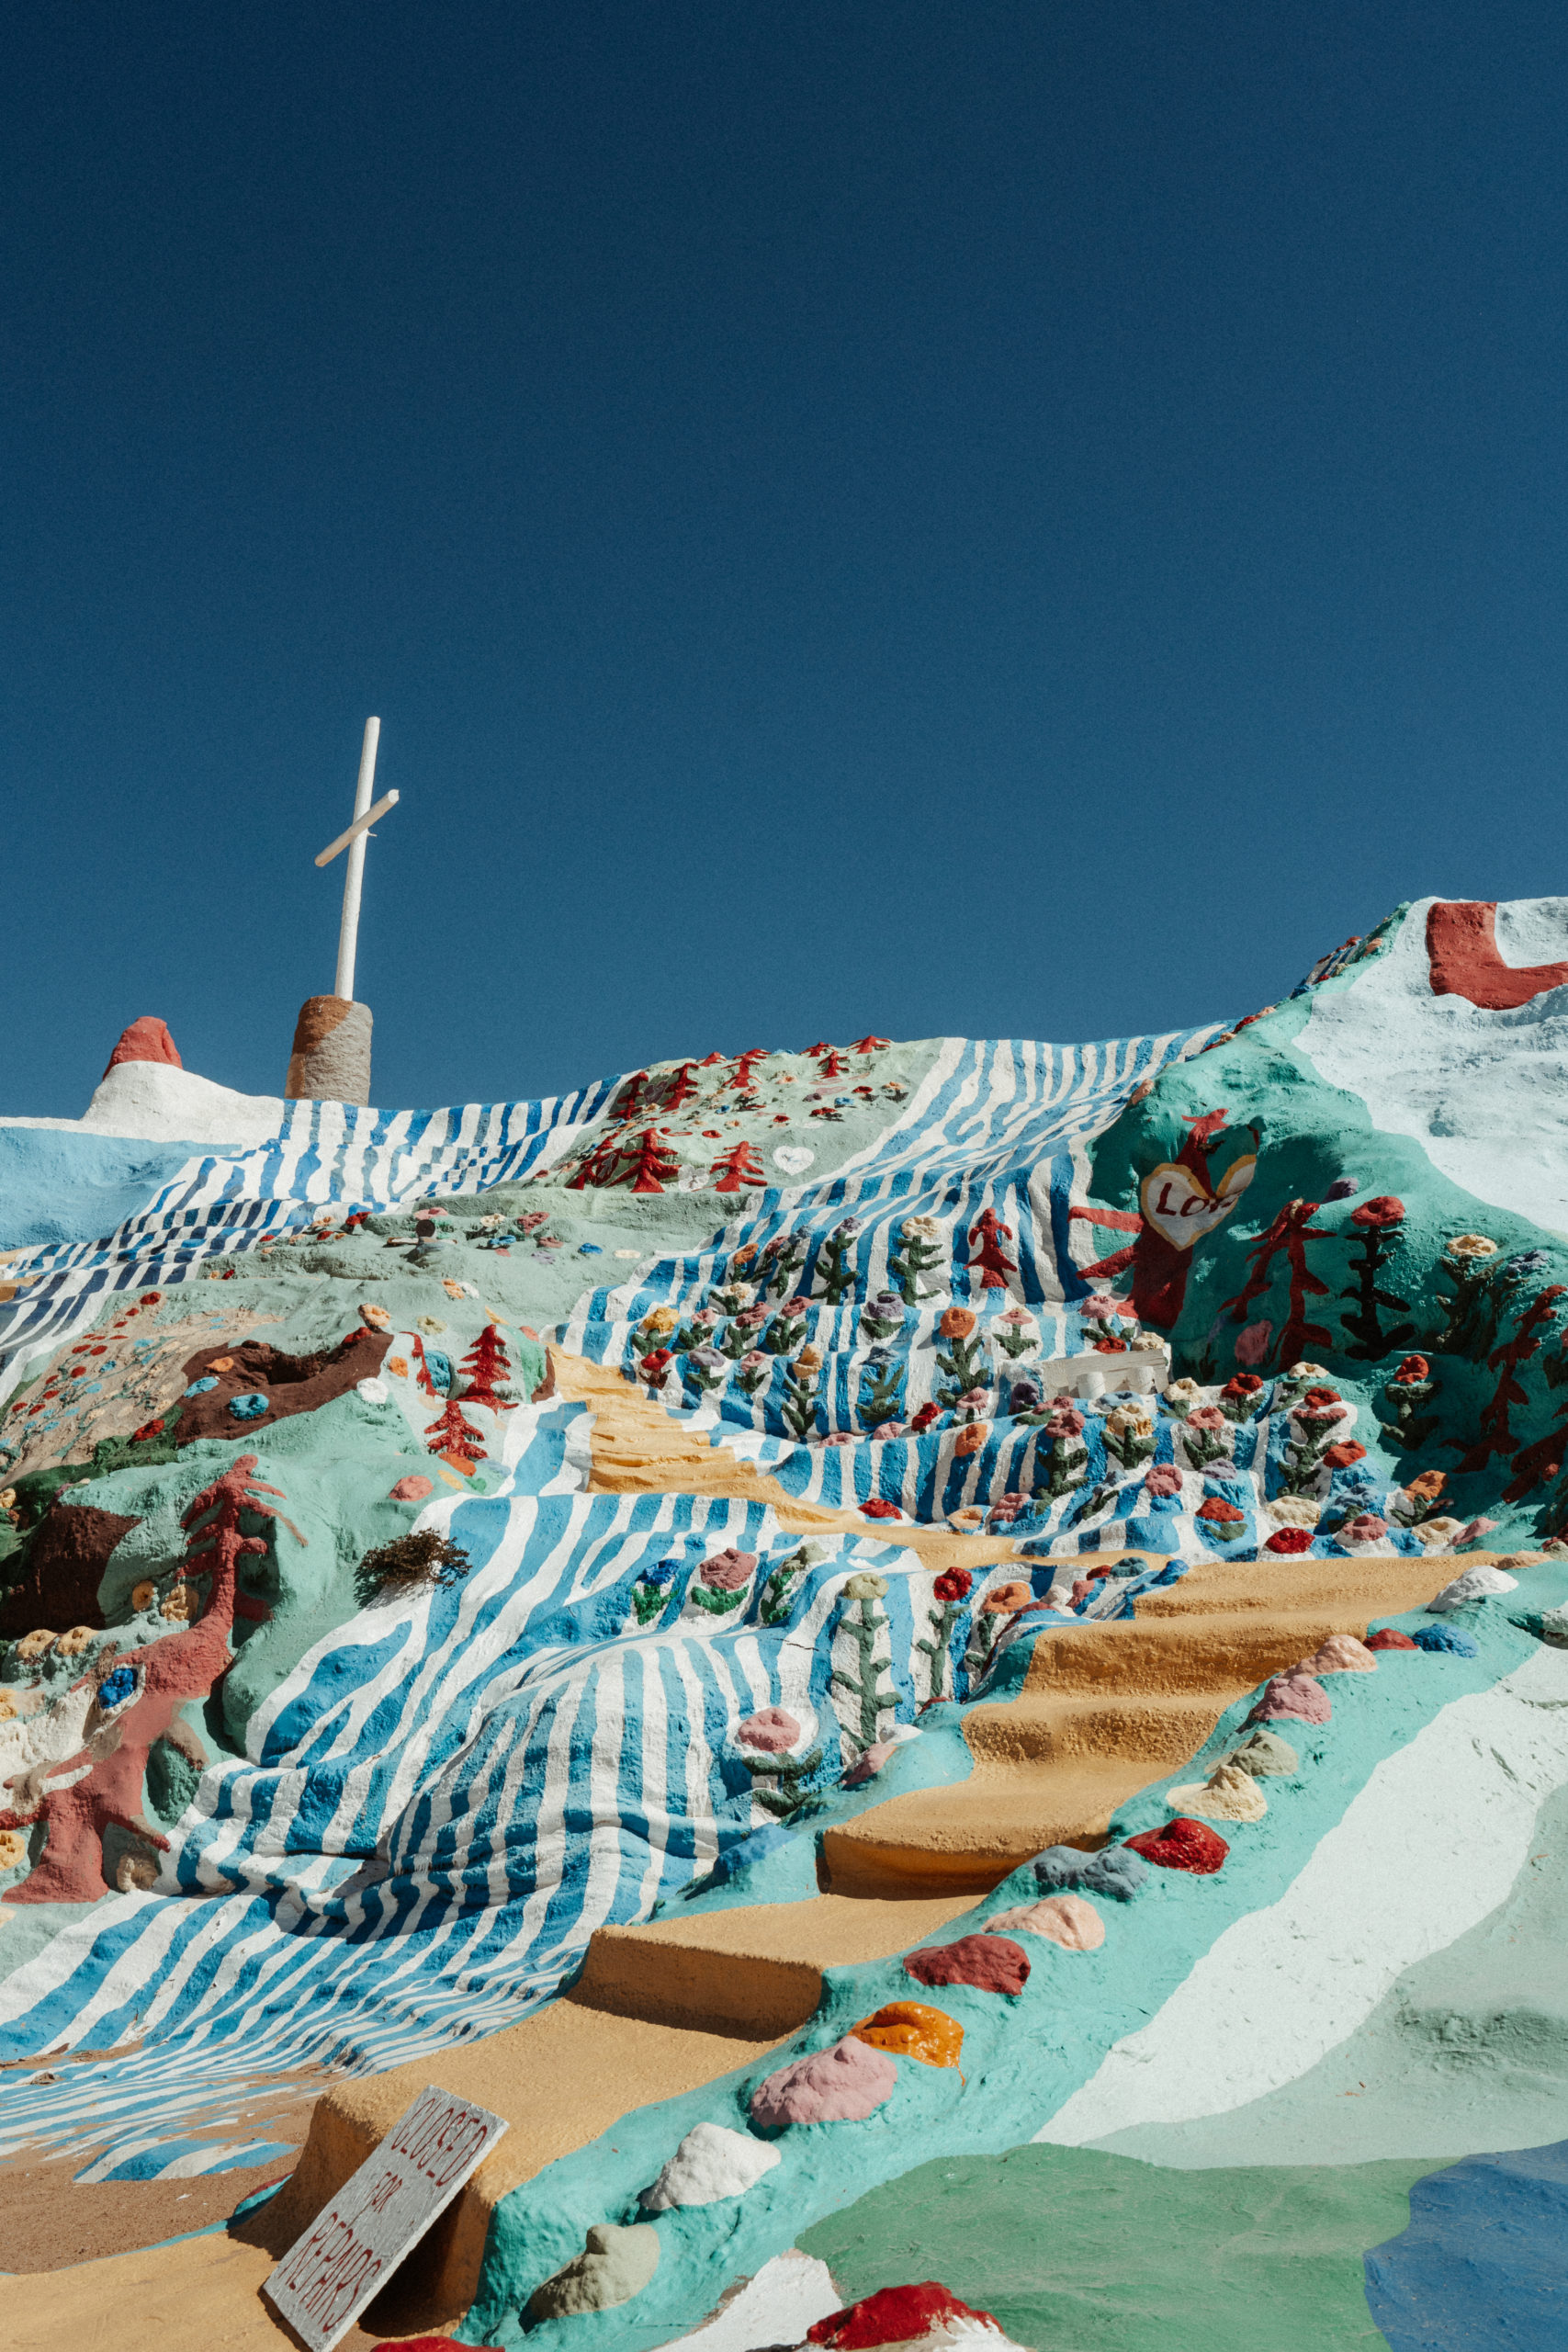 The painted mural of Salvation Mountain